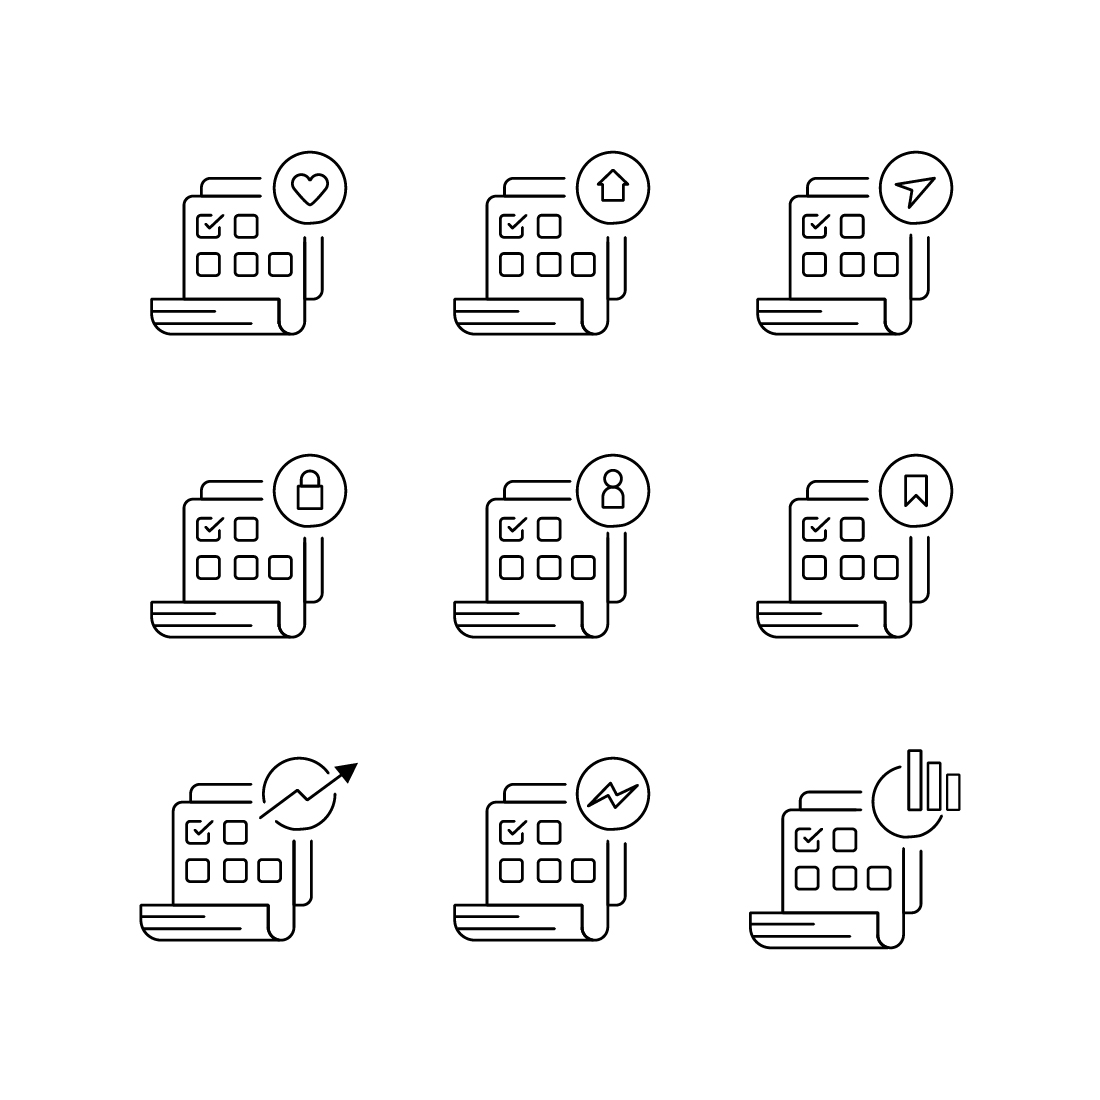 Set of icons depicting different types of web pages.